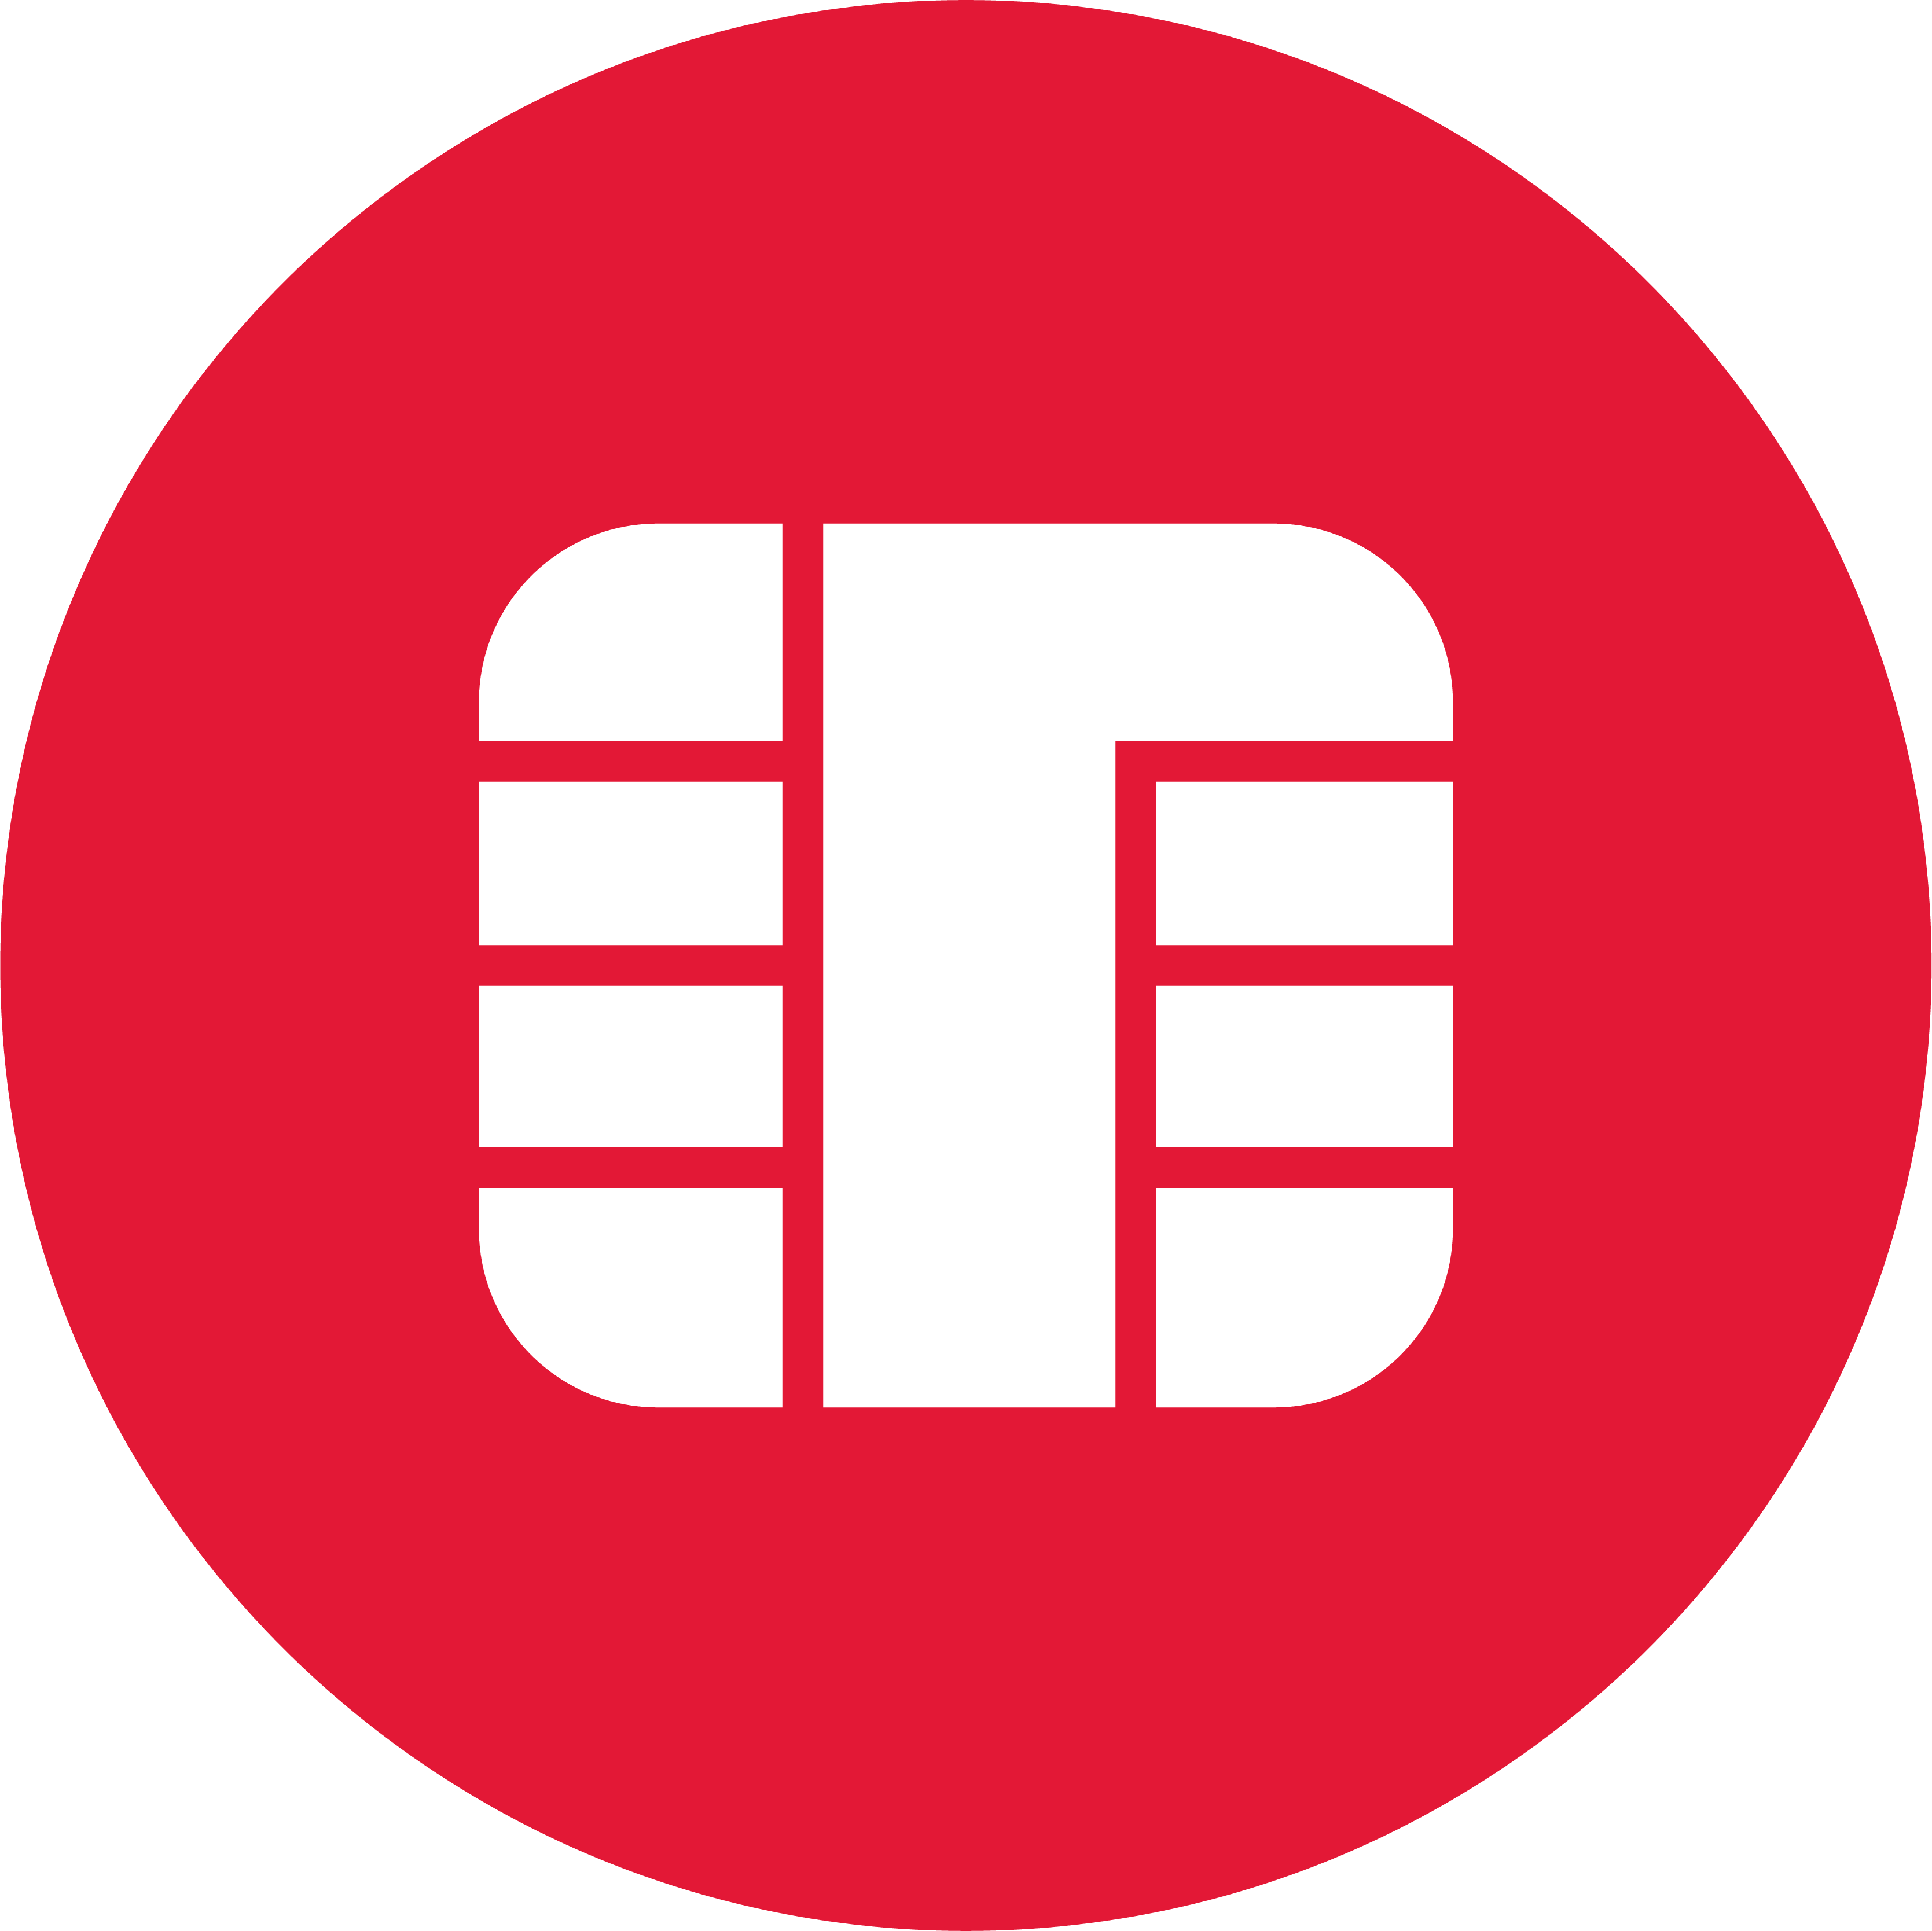 White credit card chip on red background